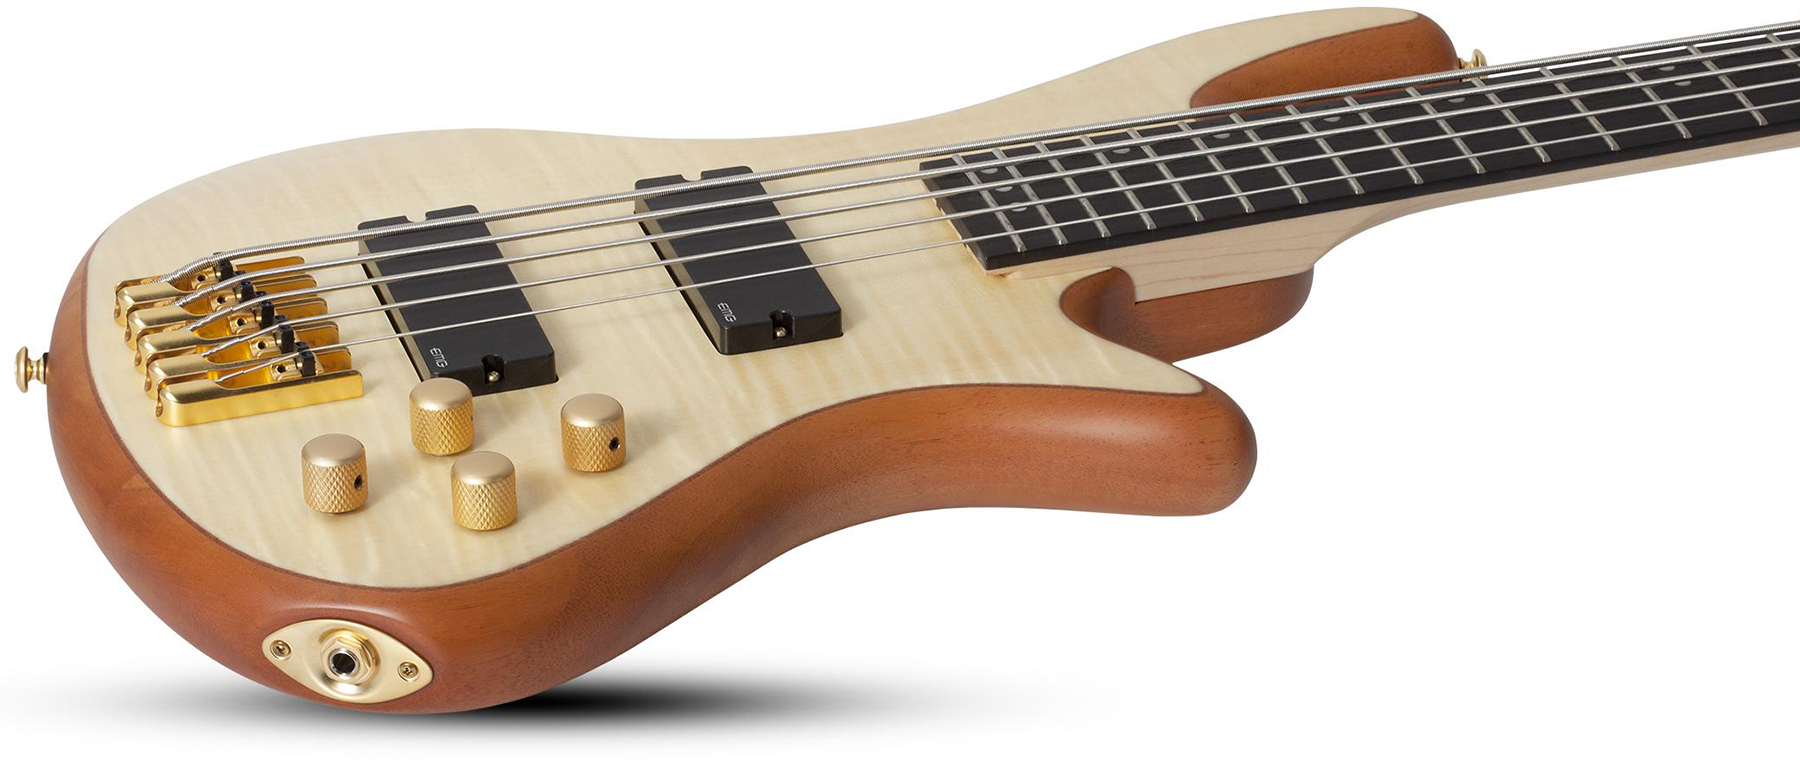 Schecter Stiletto Custom-5 5c Active Emg Rw - Natural Satin - Solid body electric bass - Variation 1